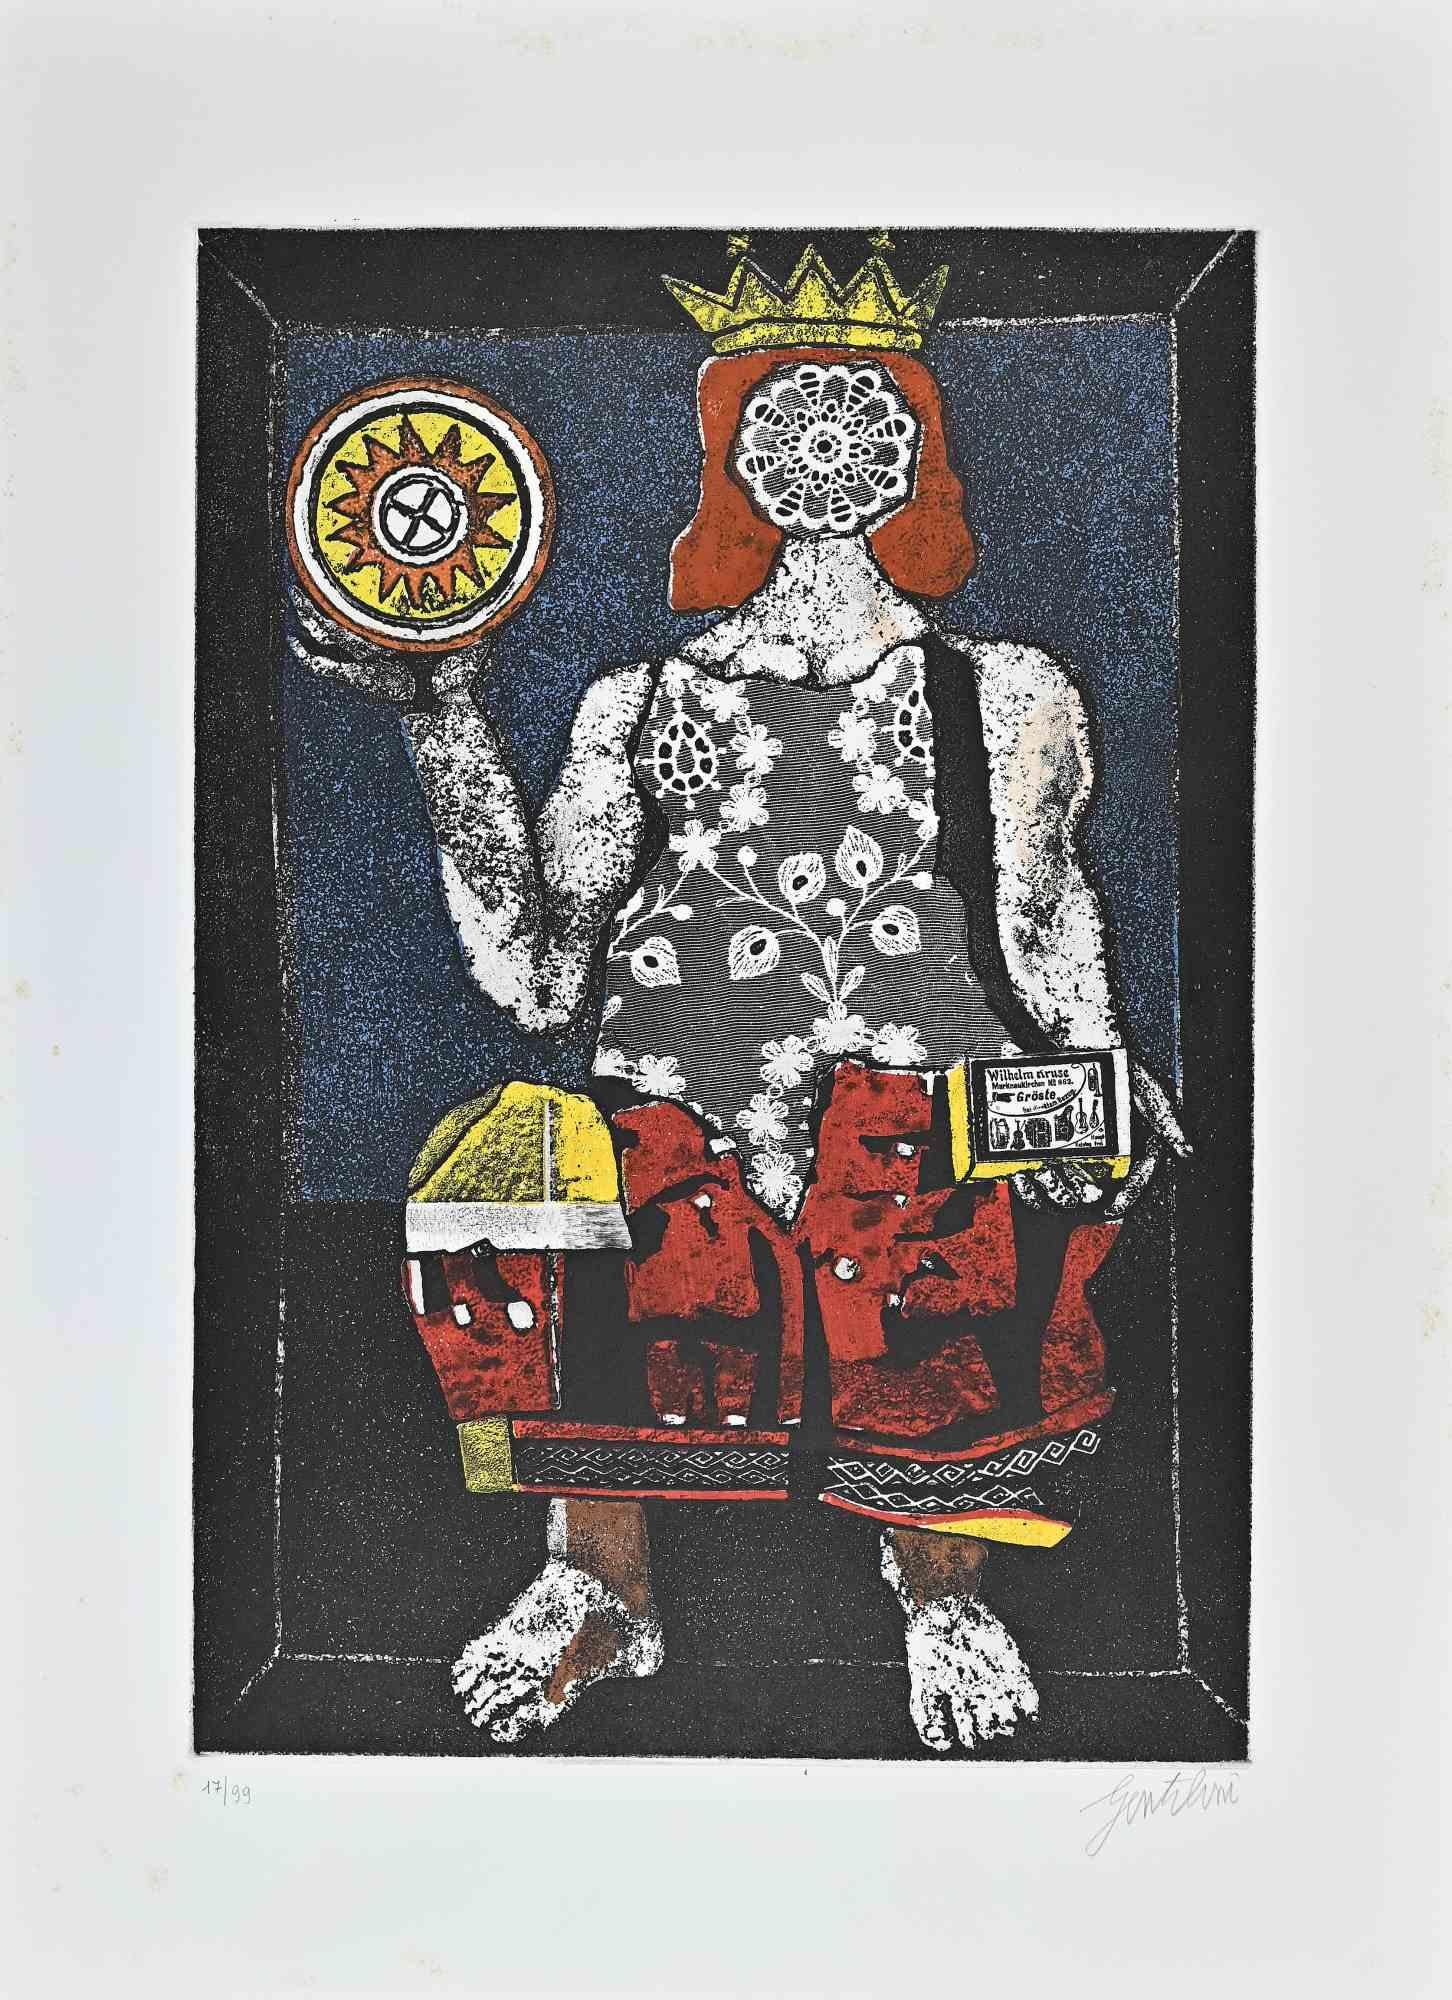 Queen of Coins is an etching realized by Franco Gentilini (Italian Painter, 1909-1981) in the 1970s.

The state of preservation of the artwork is very good.

Hand-signed.

Numbered, edition of 17/99.

Franco Gentilini (Italian Painter, 1909-1981):